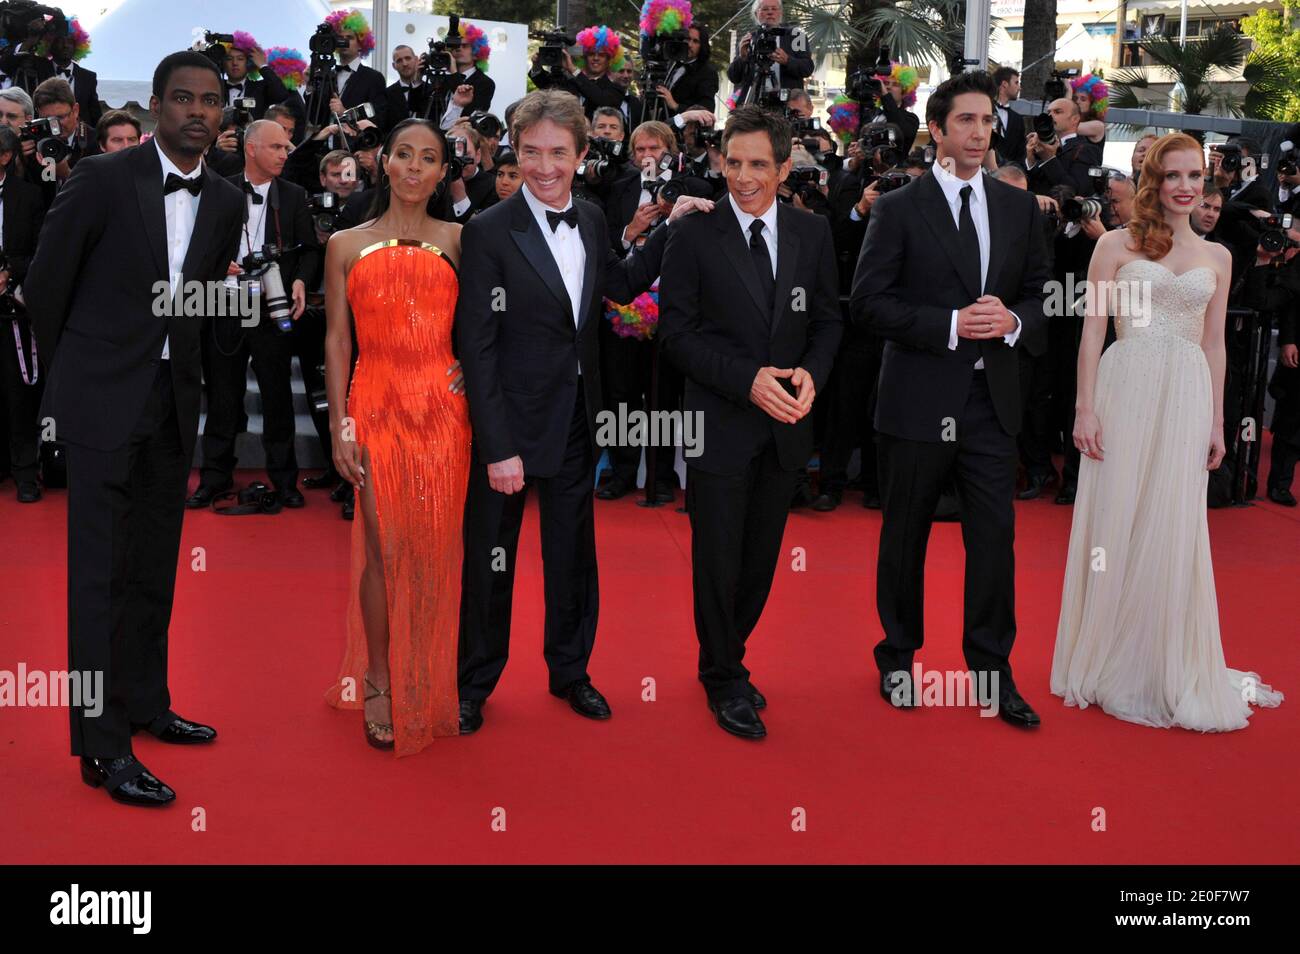 US co-director Eric Darnell, US actress Jada Pinkett Smith, US actor Chris Rock, Canadian actor Martin Short and US actor Ben Stiller posing during the premiere of 'Madagascar 3' at the 65th Cannes film festival, in Cannes, southern France, on May 18, 2012. Photo by Aurore Marechal/ABACAPRESS.COM Stock Photo